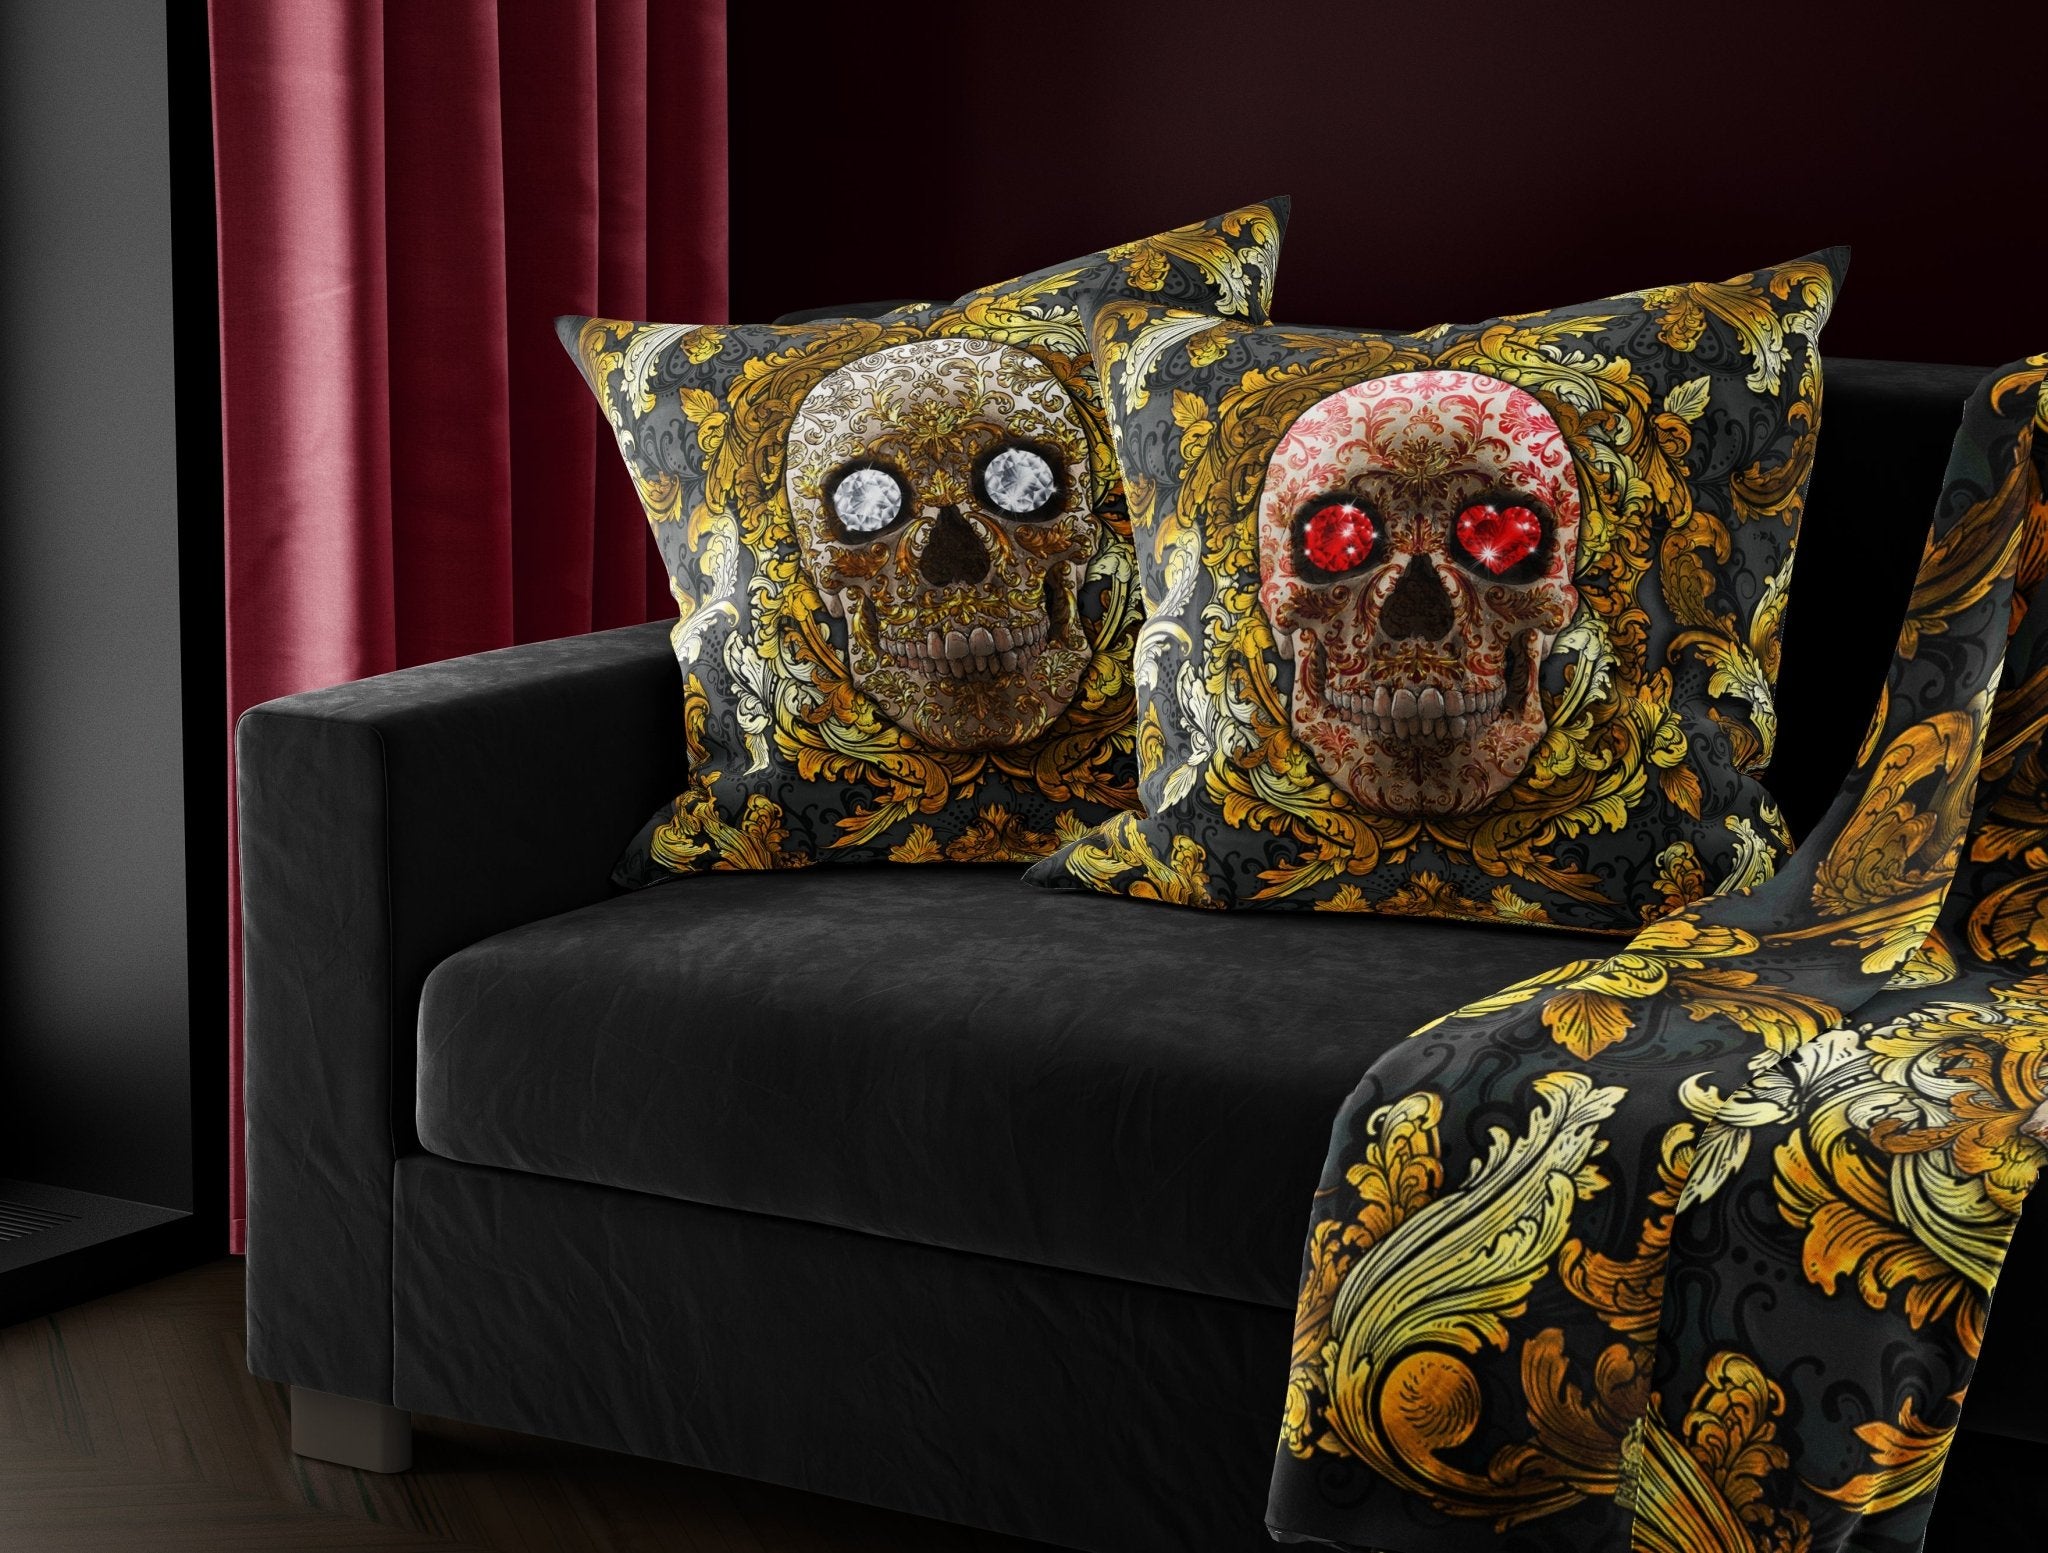 Gold Skull Throw Pillow, Decorative Accent Pillow, Square Cushion Cover, Vintage, Baroque Decor, Macabre Art, Alternative Home - Black and Red, 2 Colors - Abysm Internal